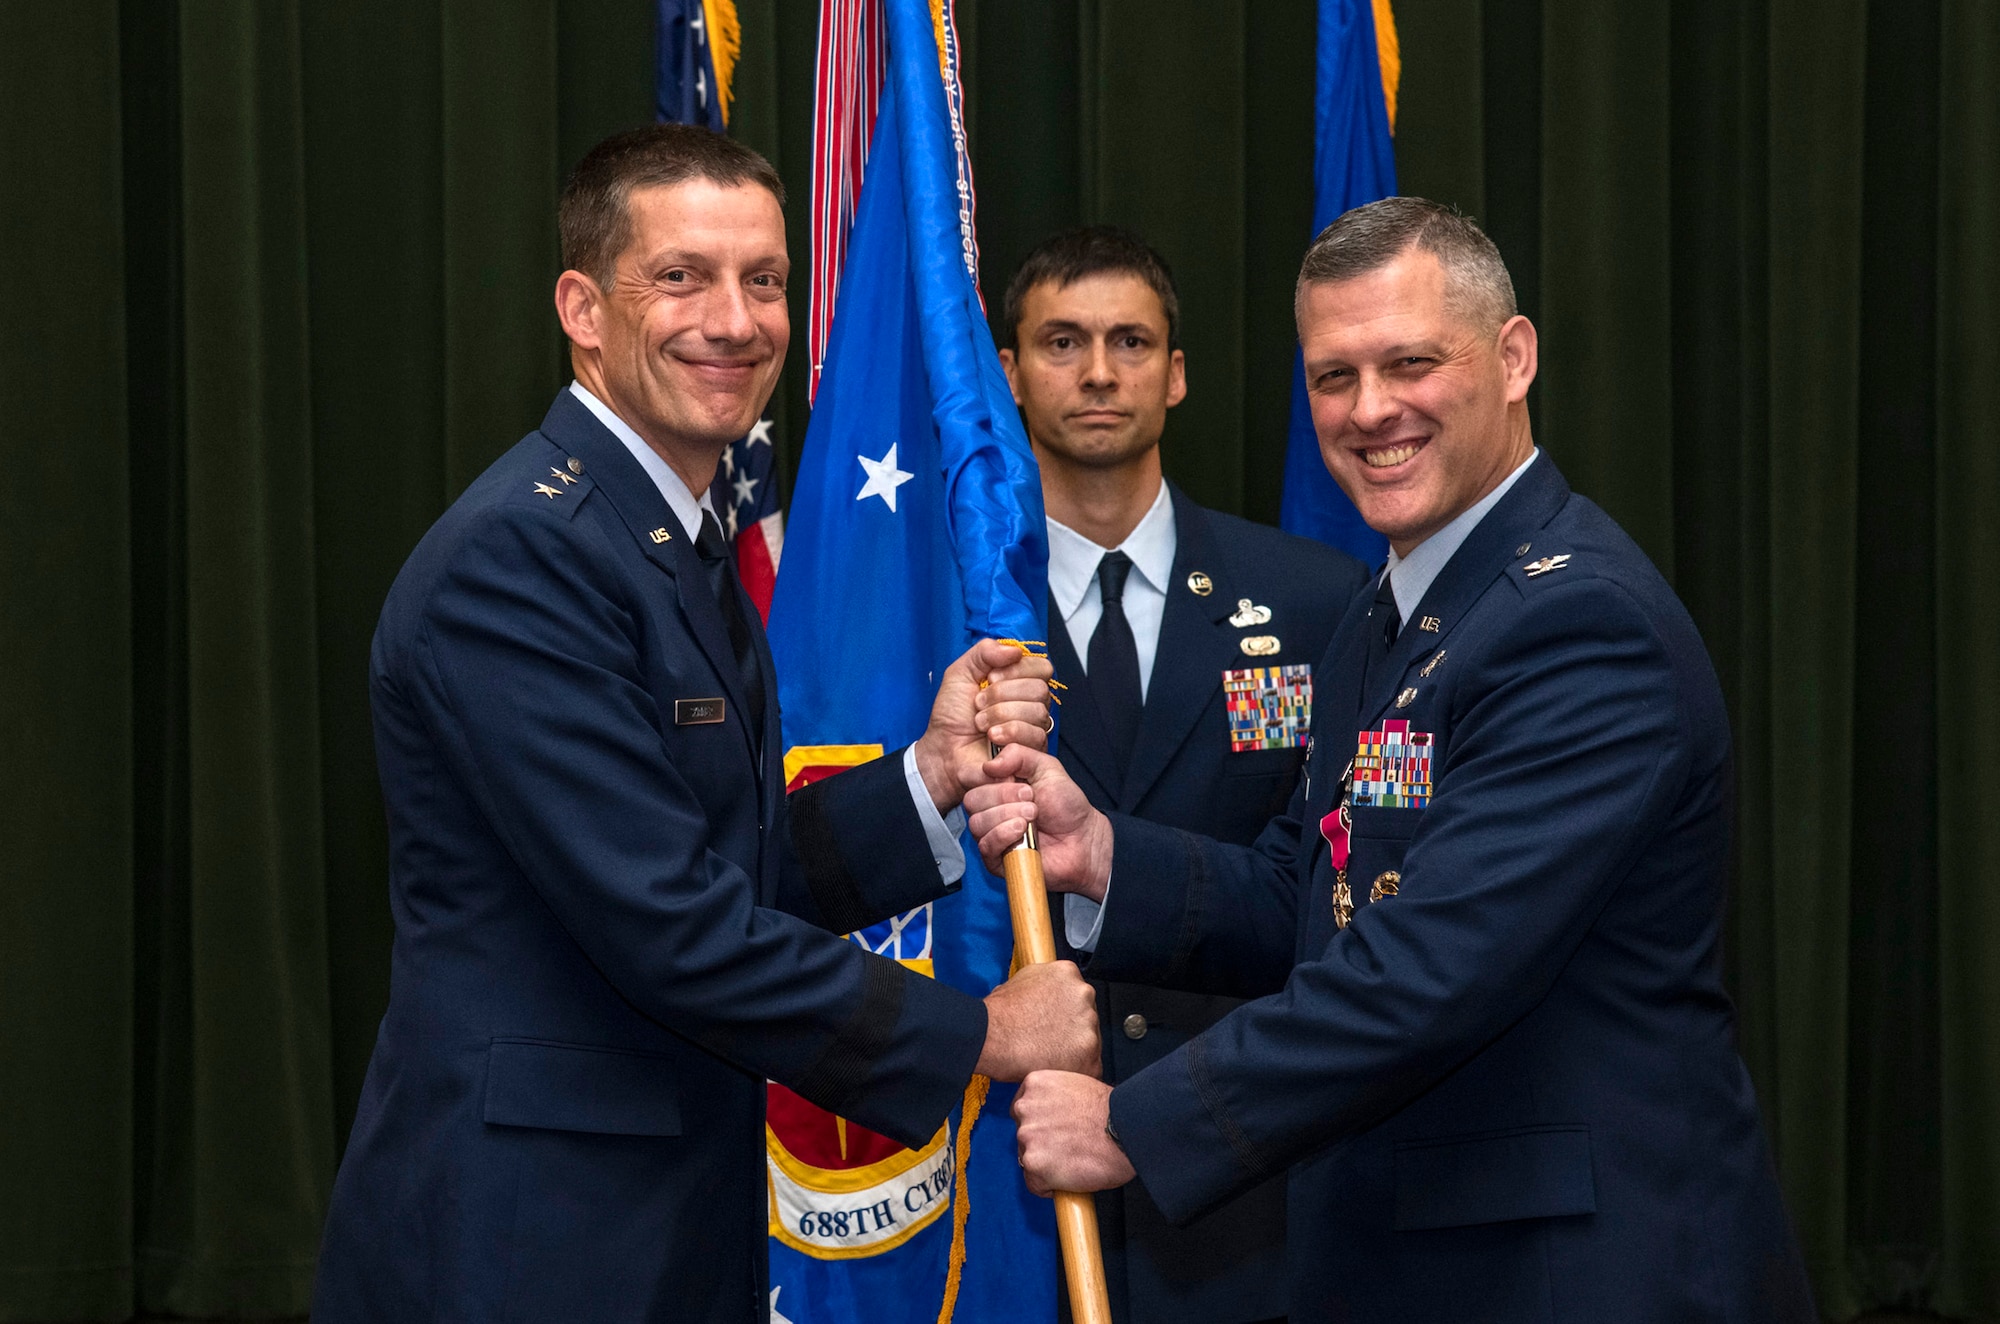 Col. Eric DeLange (right) relinquishes command of the 688th Cyberspace Wing to Maj. Gen. Robert Skinner, 24th Air Force commander, during the wing’s change of command ceremony at Joint Base San Antonio-Lackland, Texas, June 25, 2019. Col. Steven Anderson took command of the 688th CW during the ceremony. (U.S. Air Force photo by Johnny Saldivar)